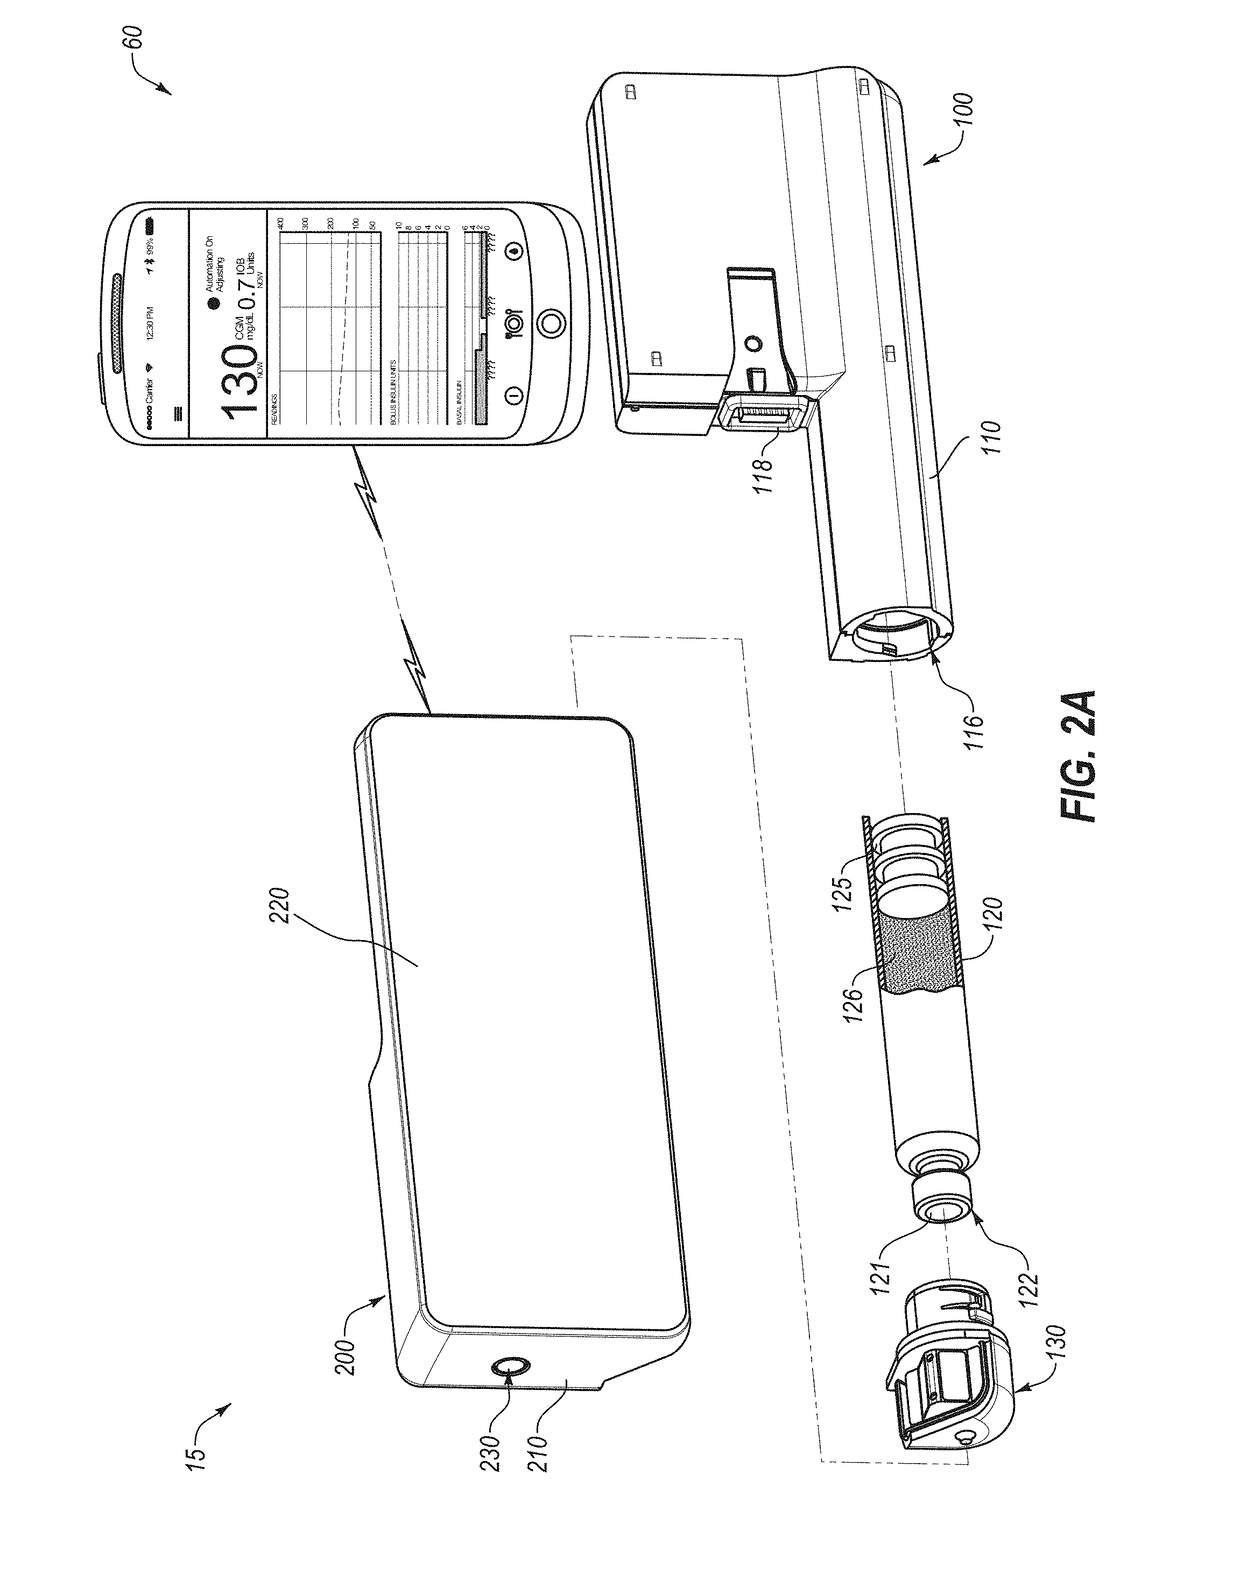 System and method for adjusting insulin delivery